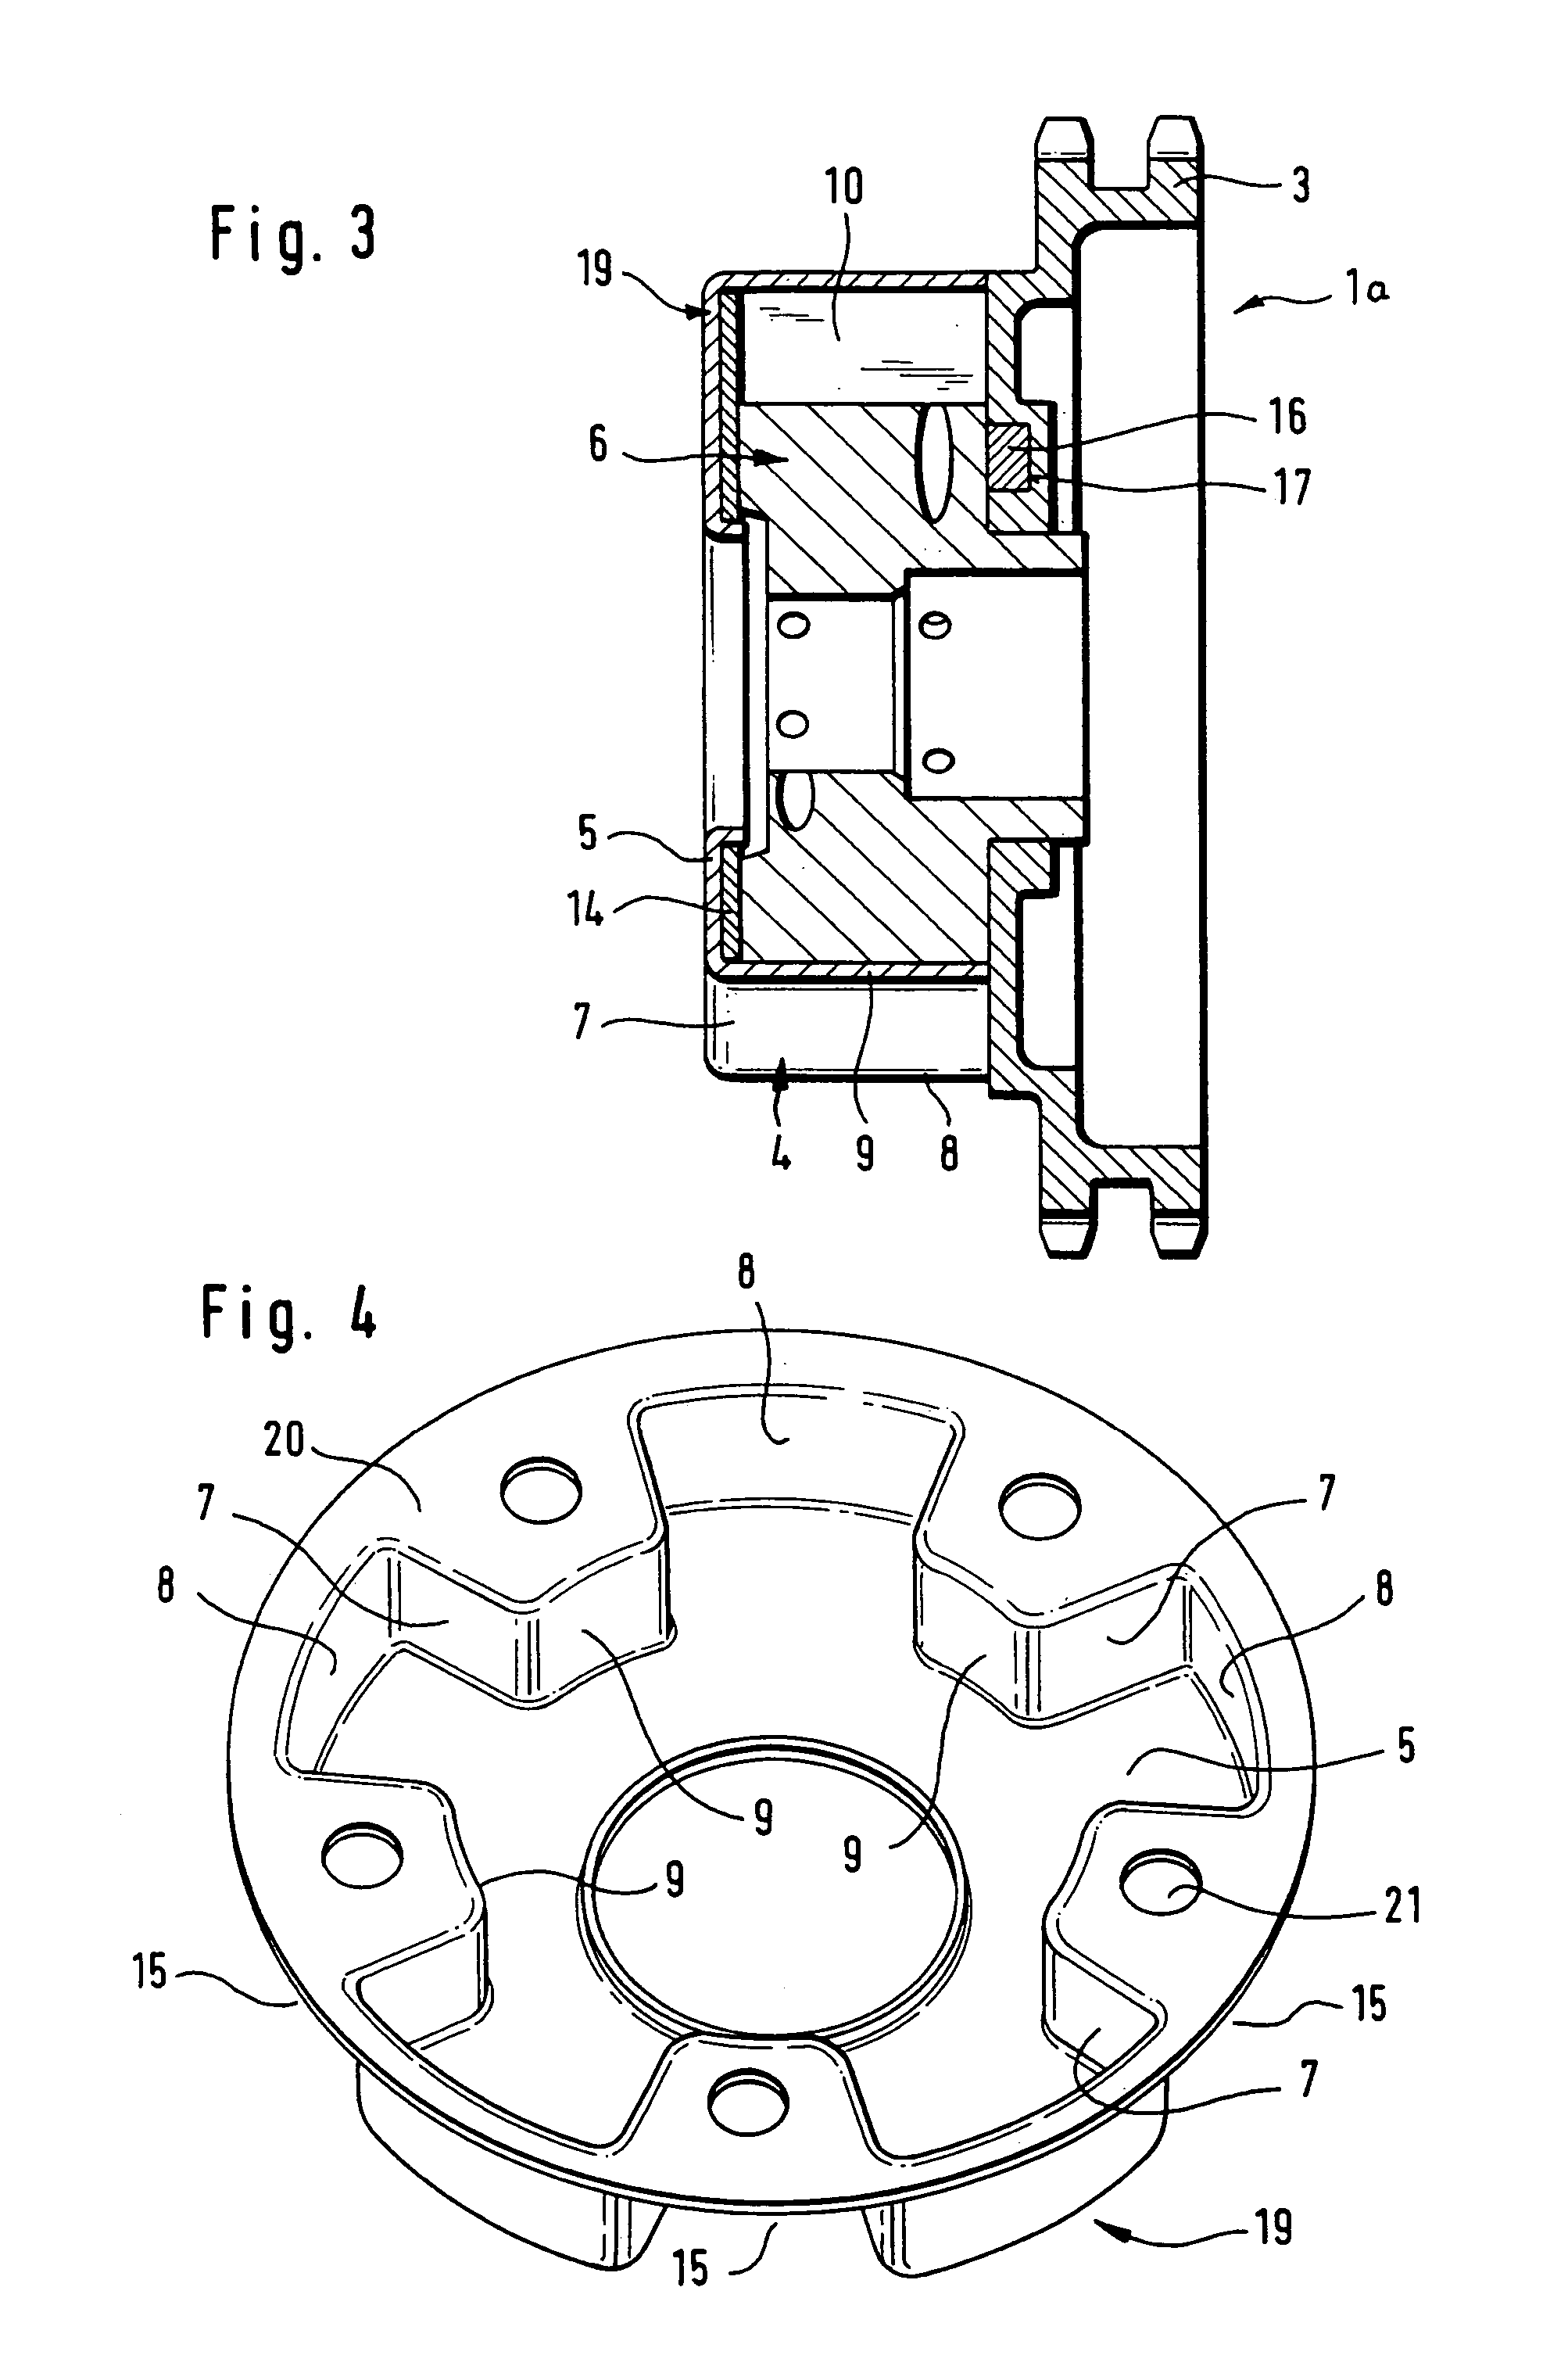 Internal combustion engine with hydraulic device for adjusting the rotation angle of a camshaft in relation to a crankshaft